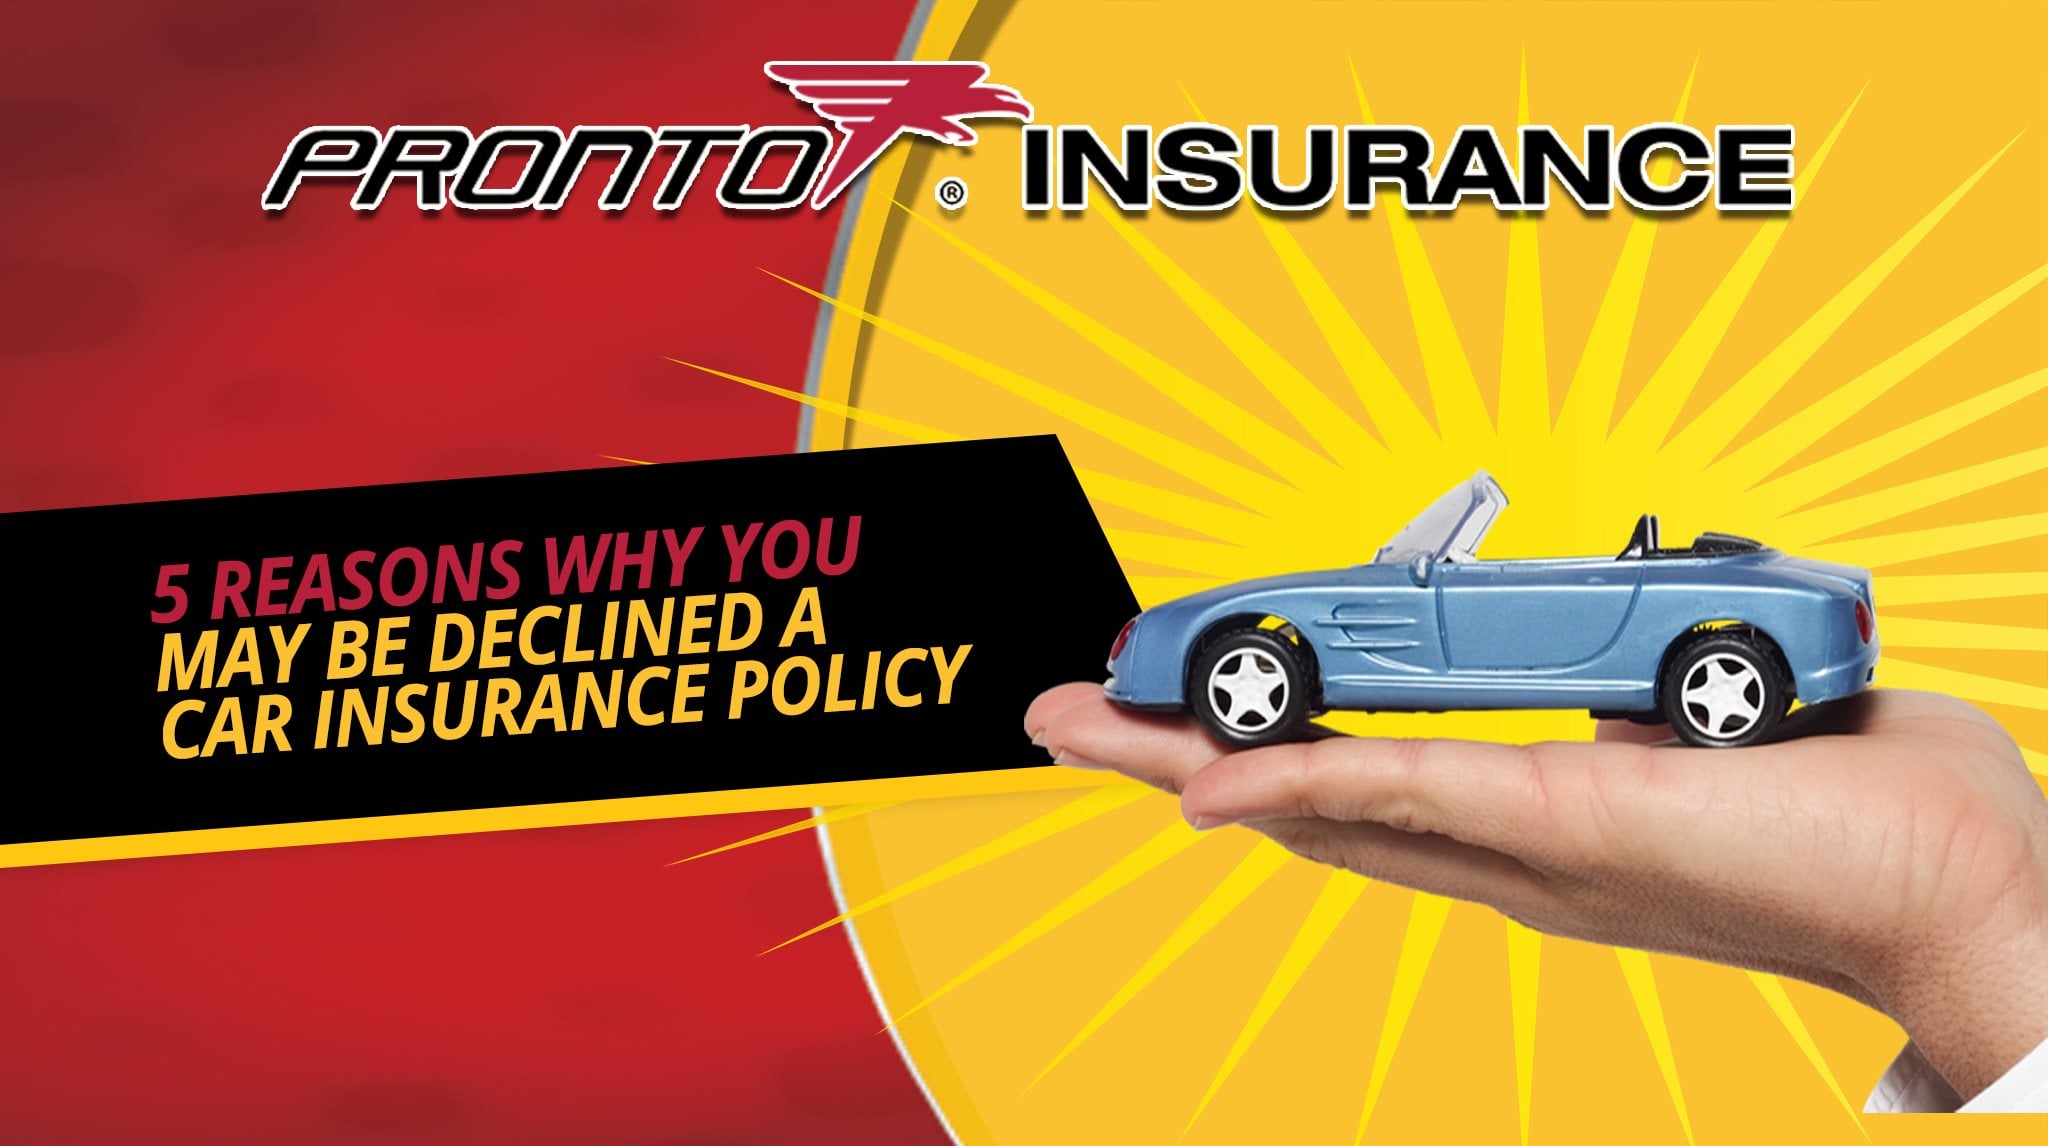 5 Reasons Why You May Be Declined a Car Insurance Policy